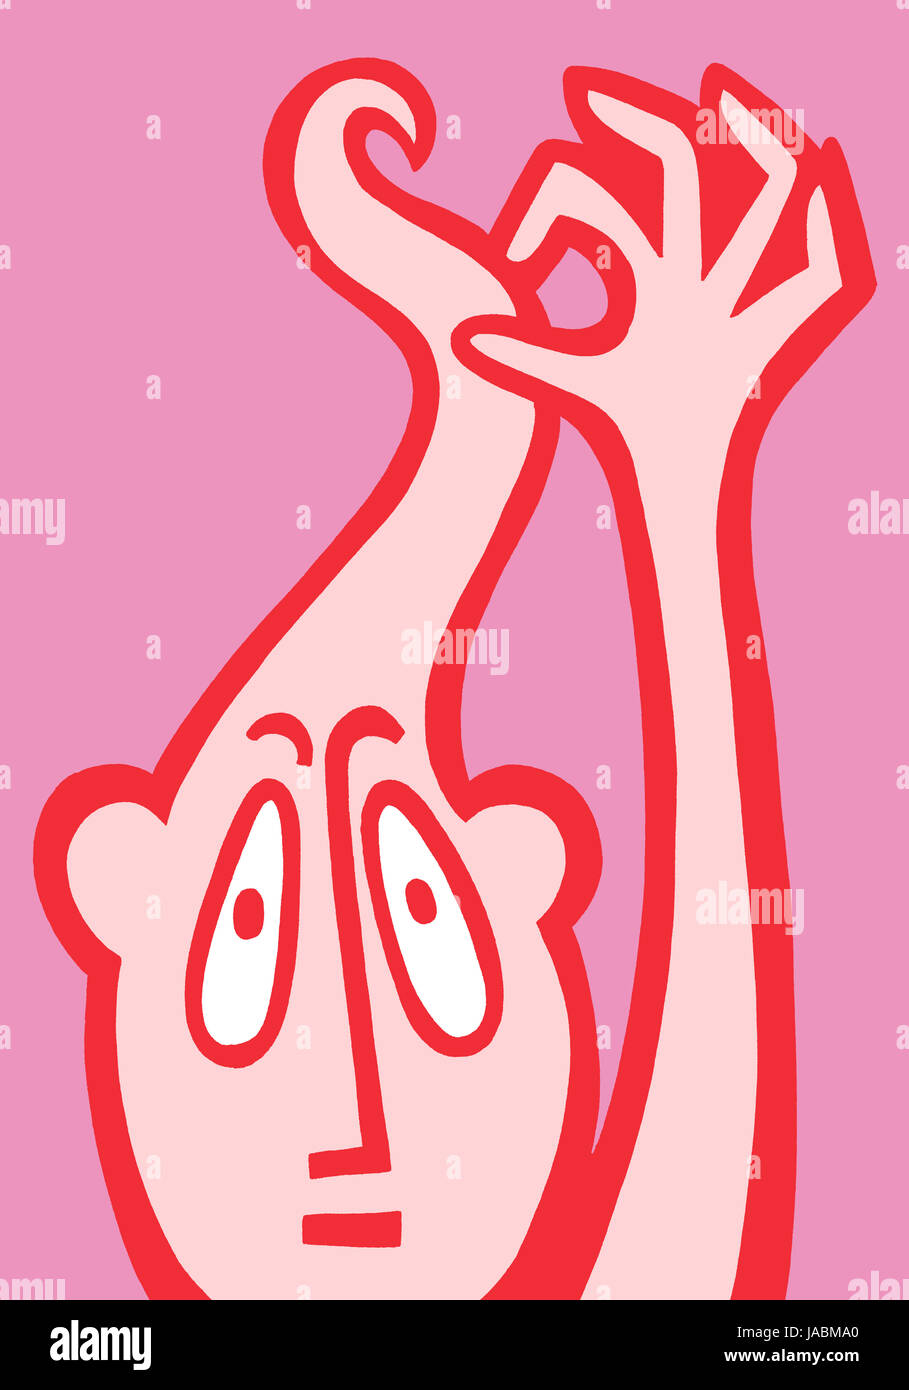 Stretchy. A simple graphic illustration. Stock Photo